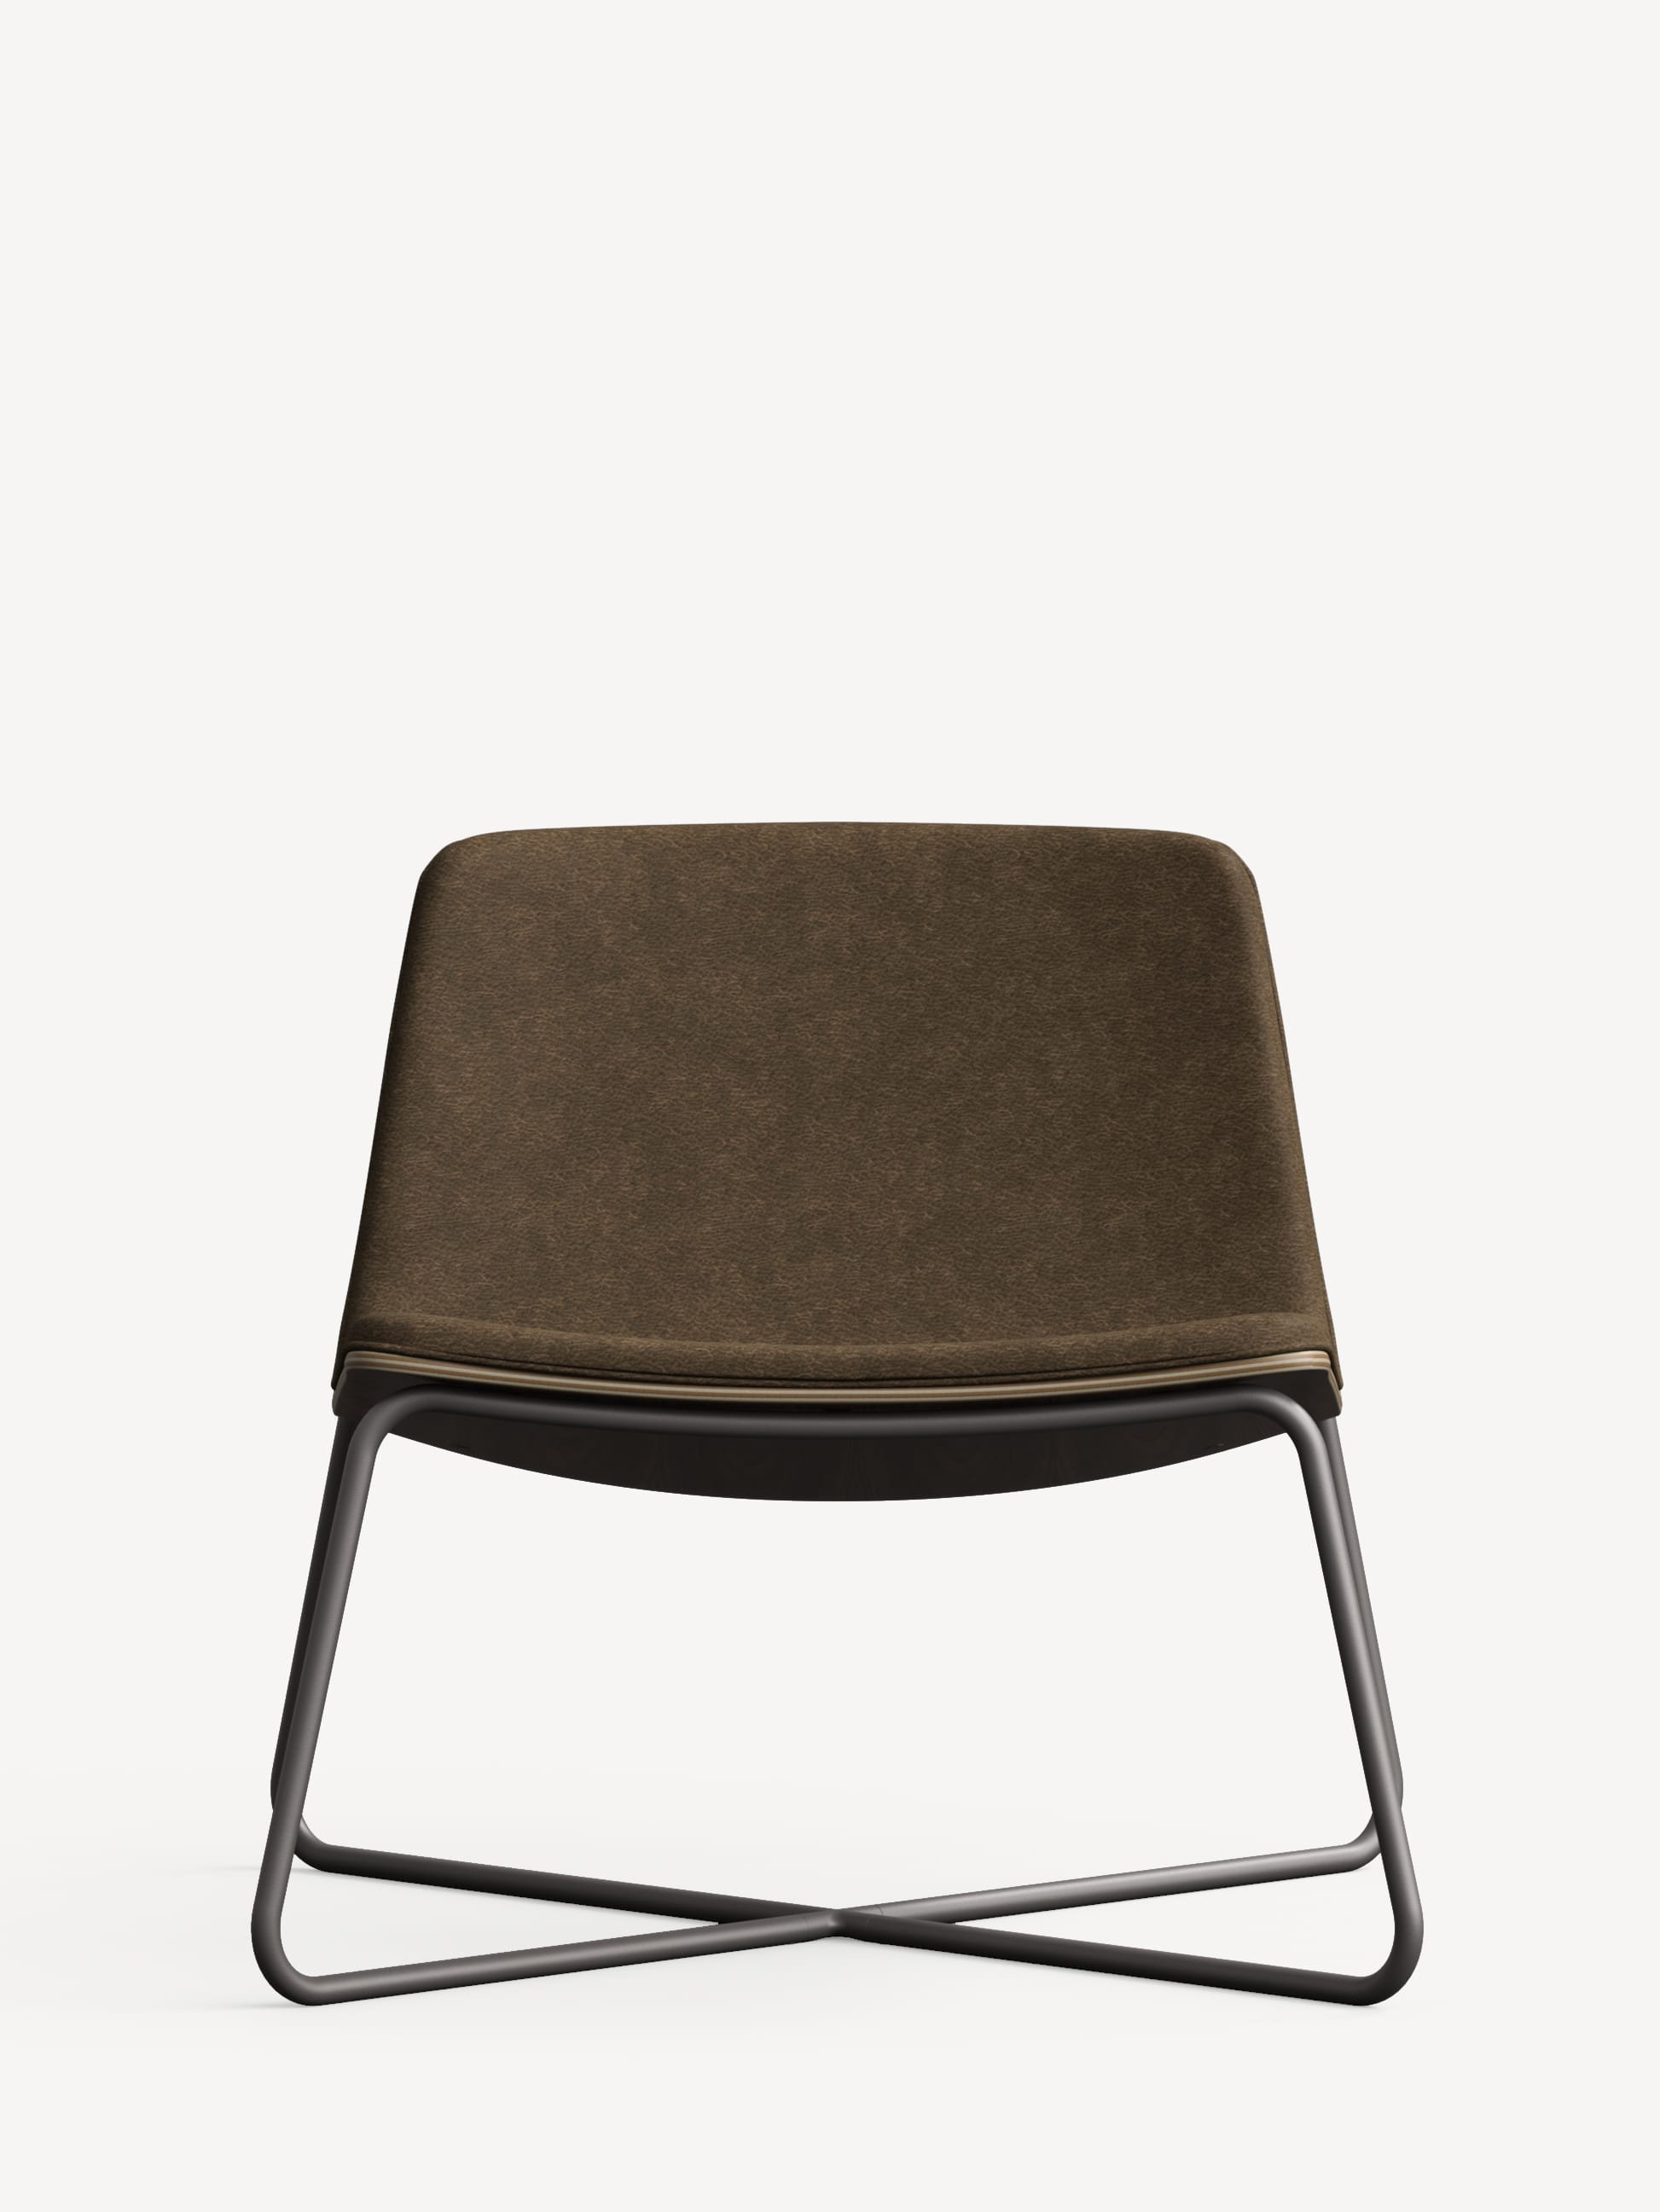 Front view of the vicinity lounge chair with a black frame, brown wood veneer shell back and brown upholstered front.